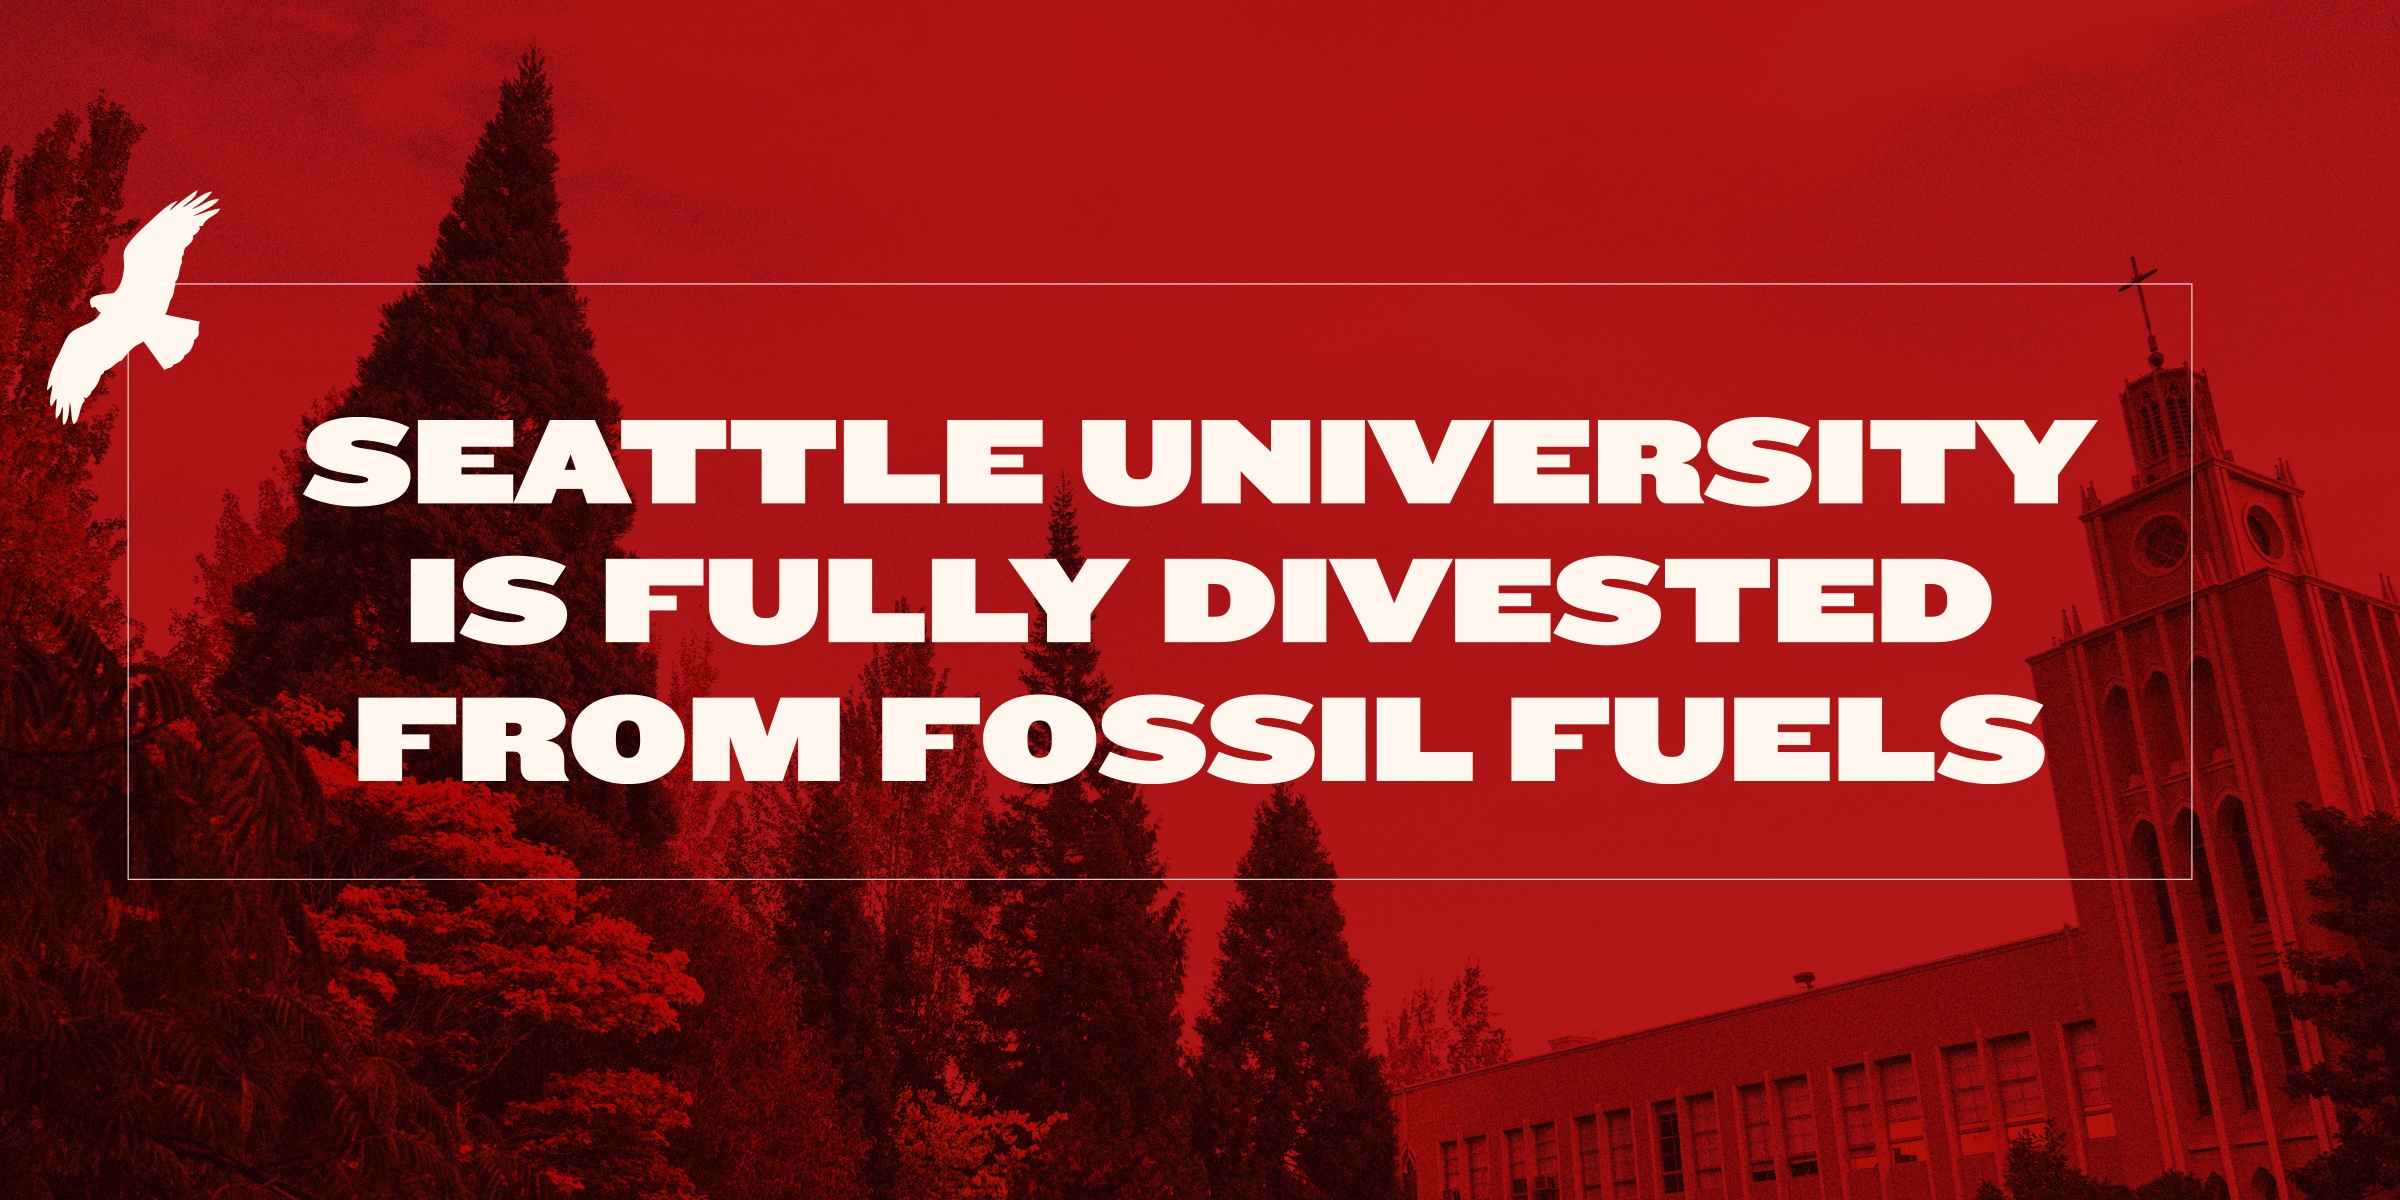 Graphic about fossil fuels divestment